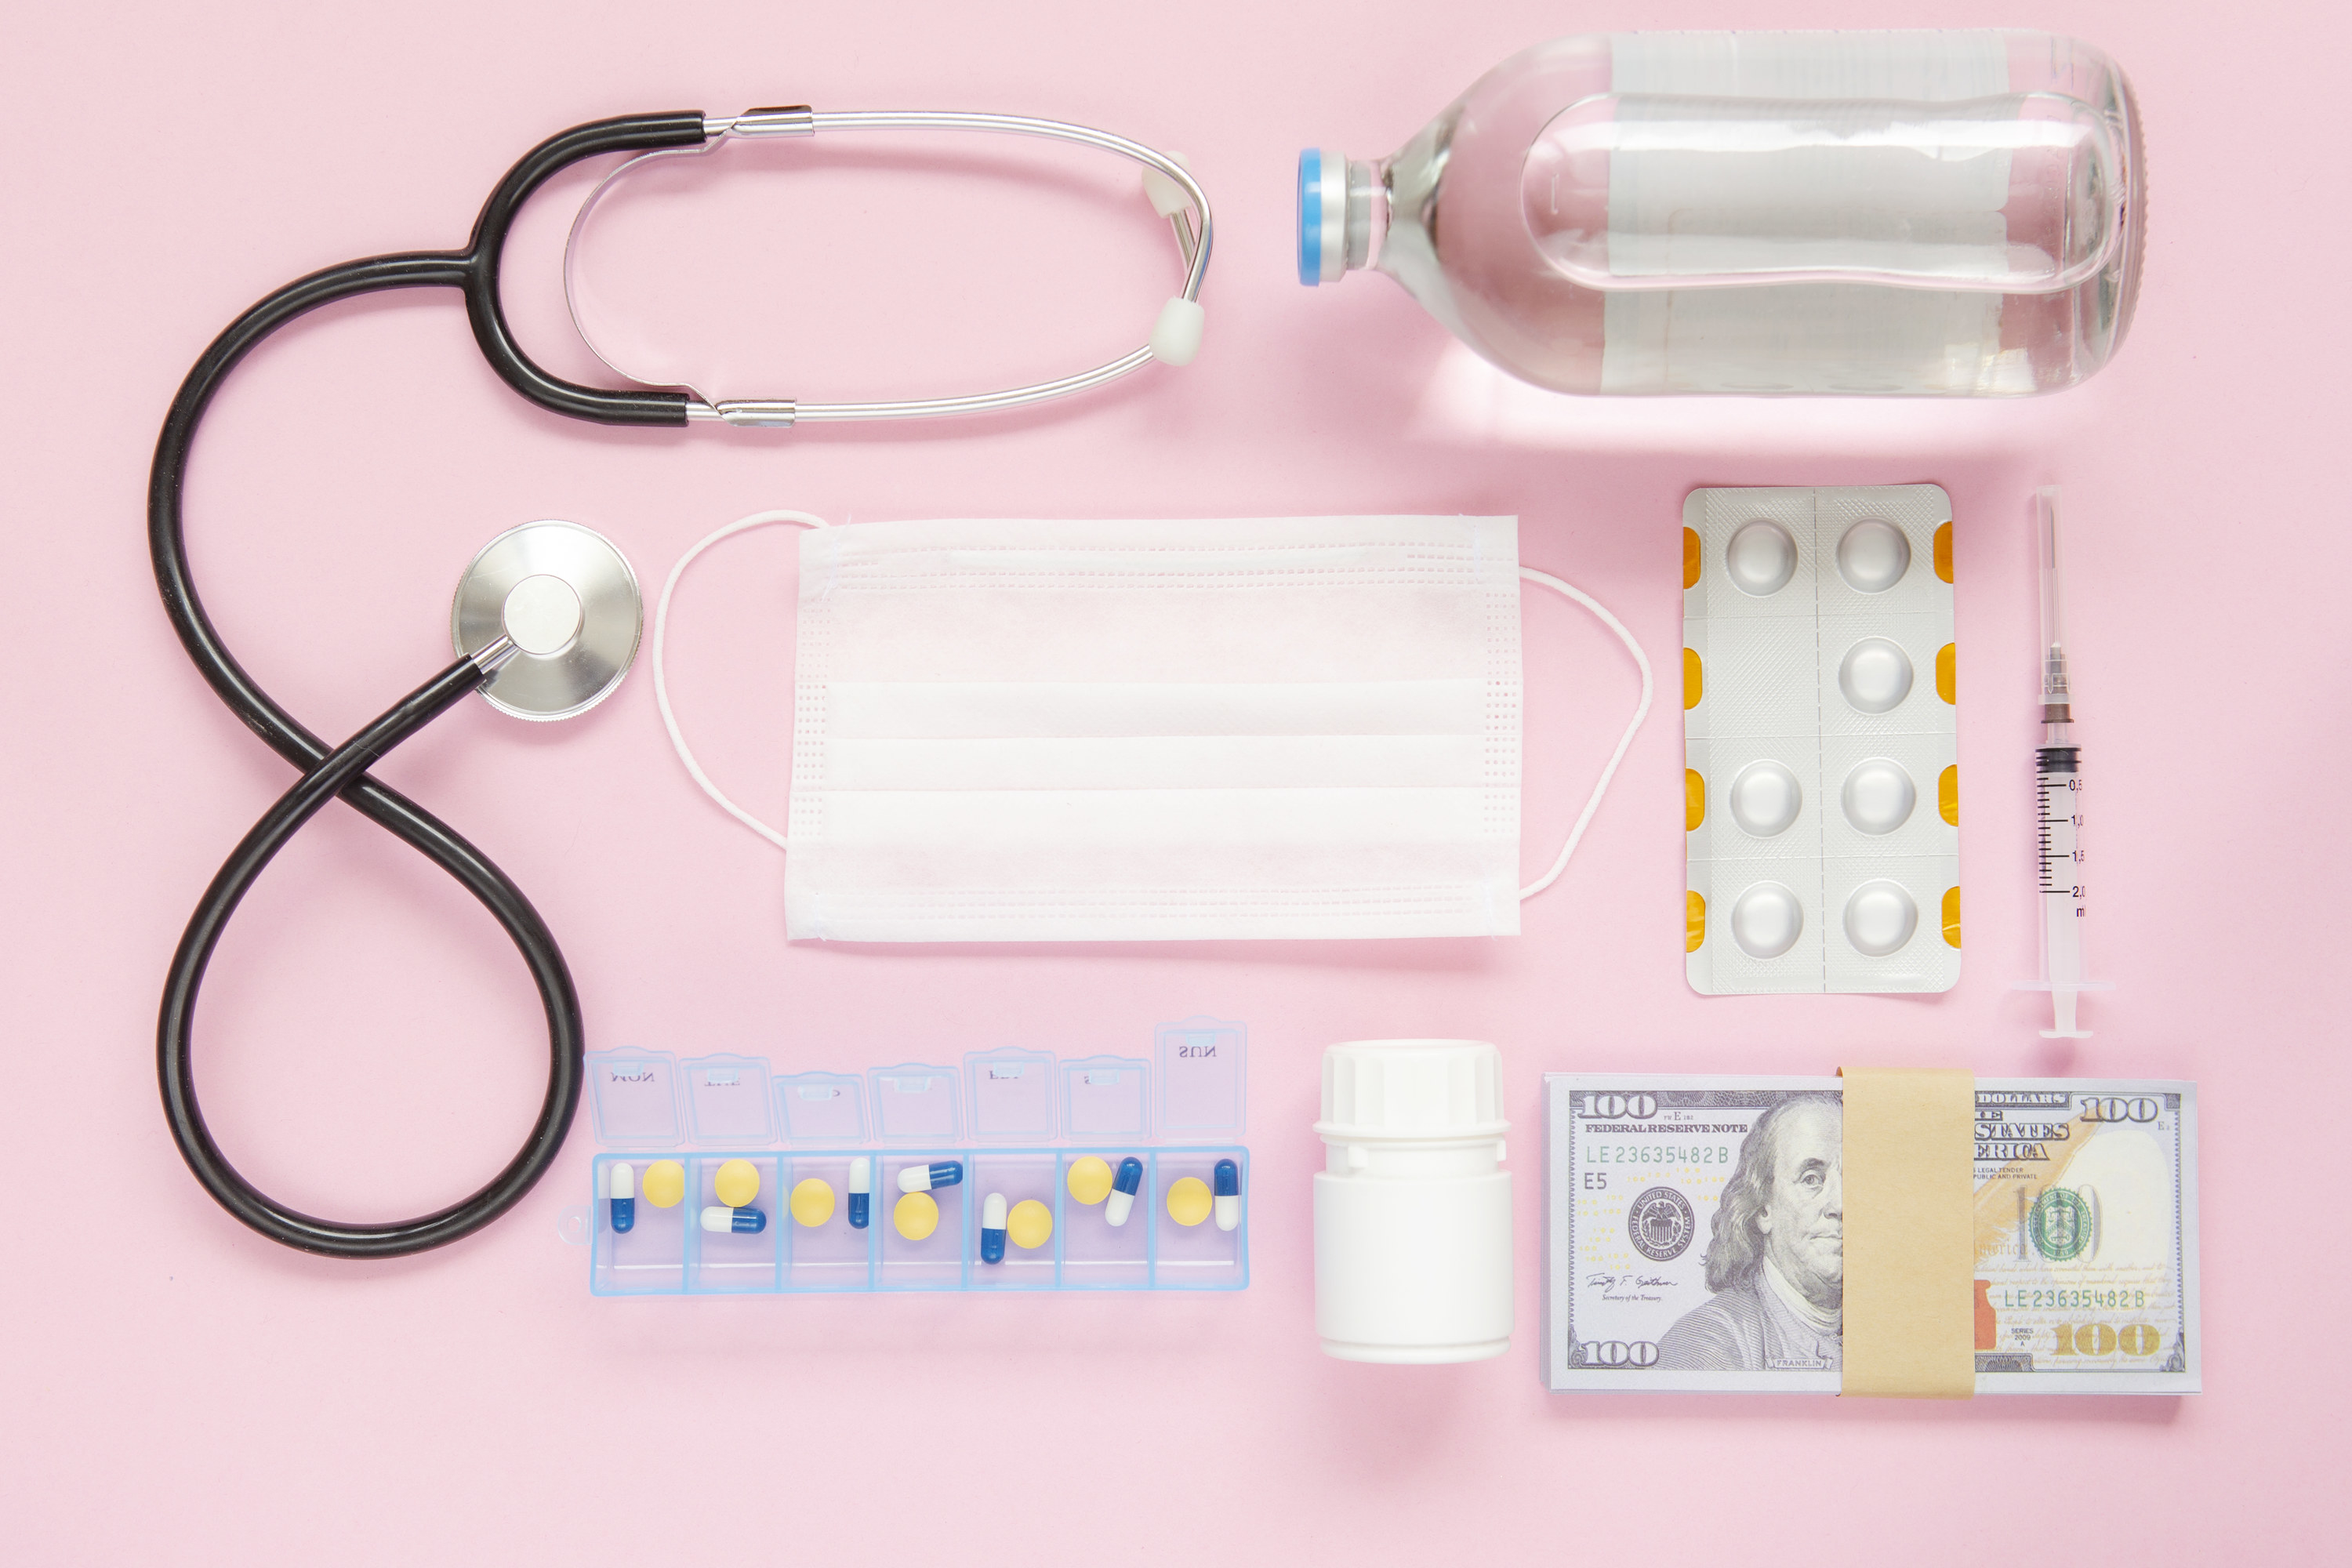 A stethoscope, medicine, face mask, and cash